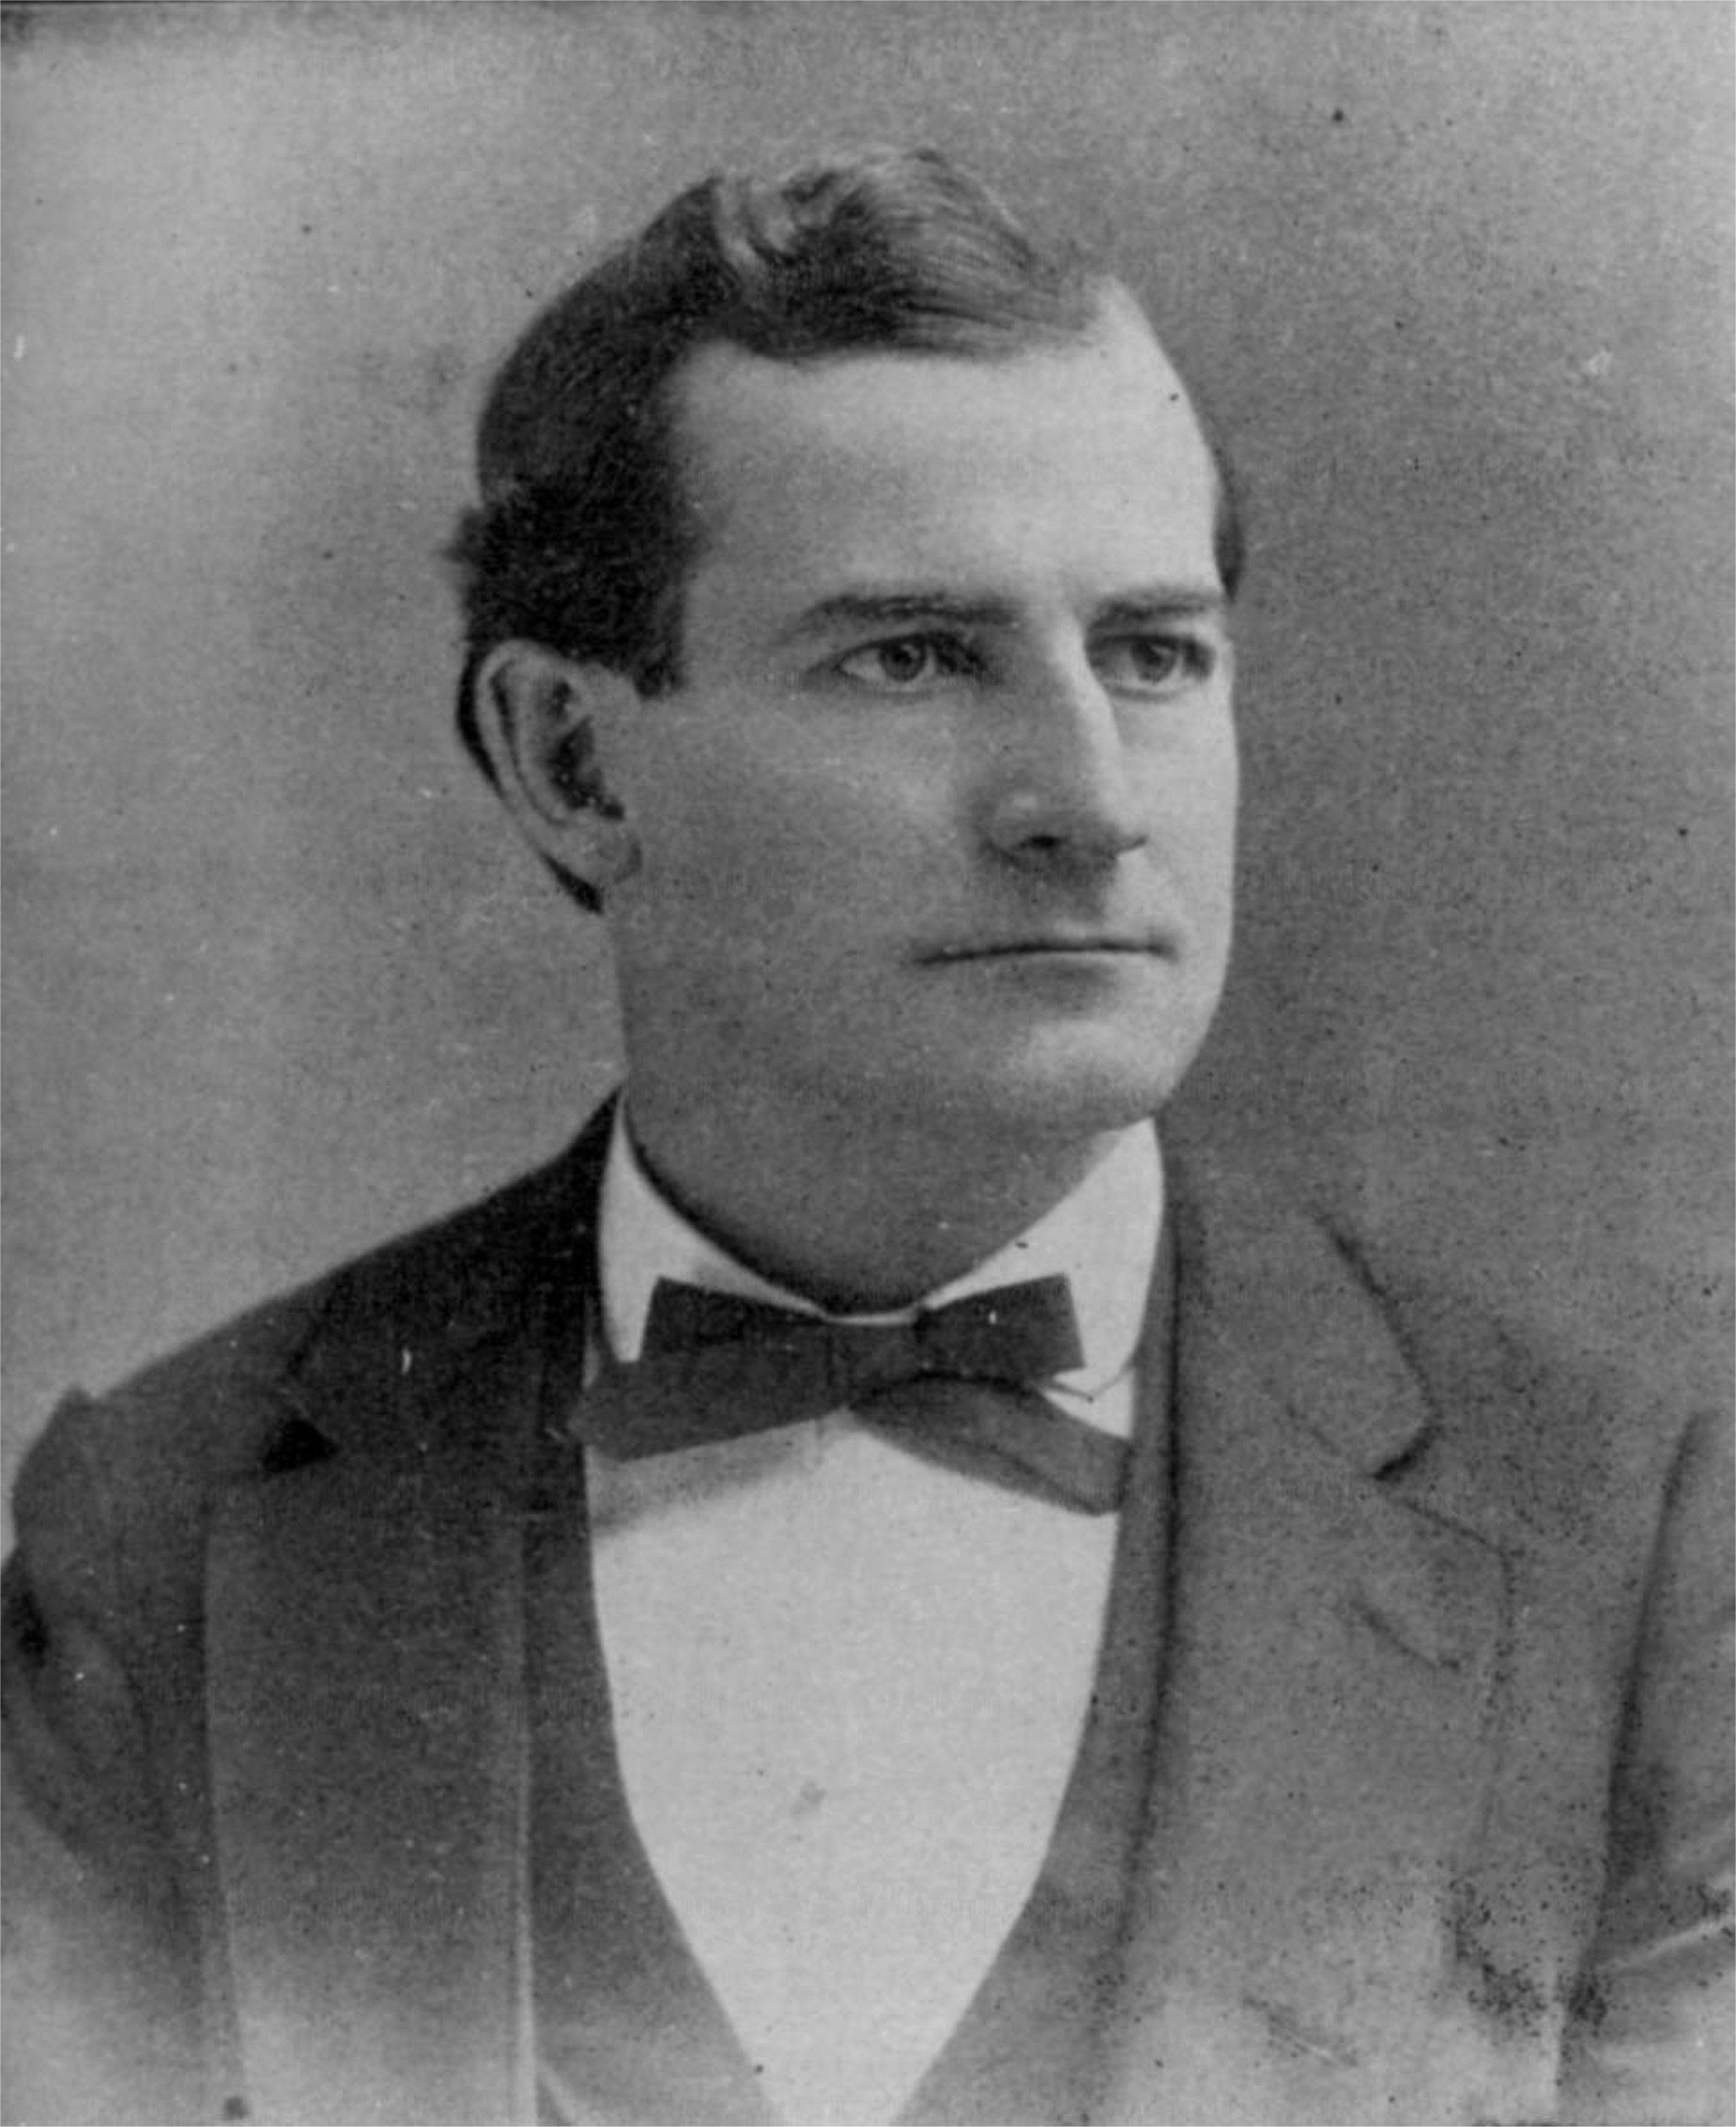 Photograph of a young William Jennings Bryan